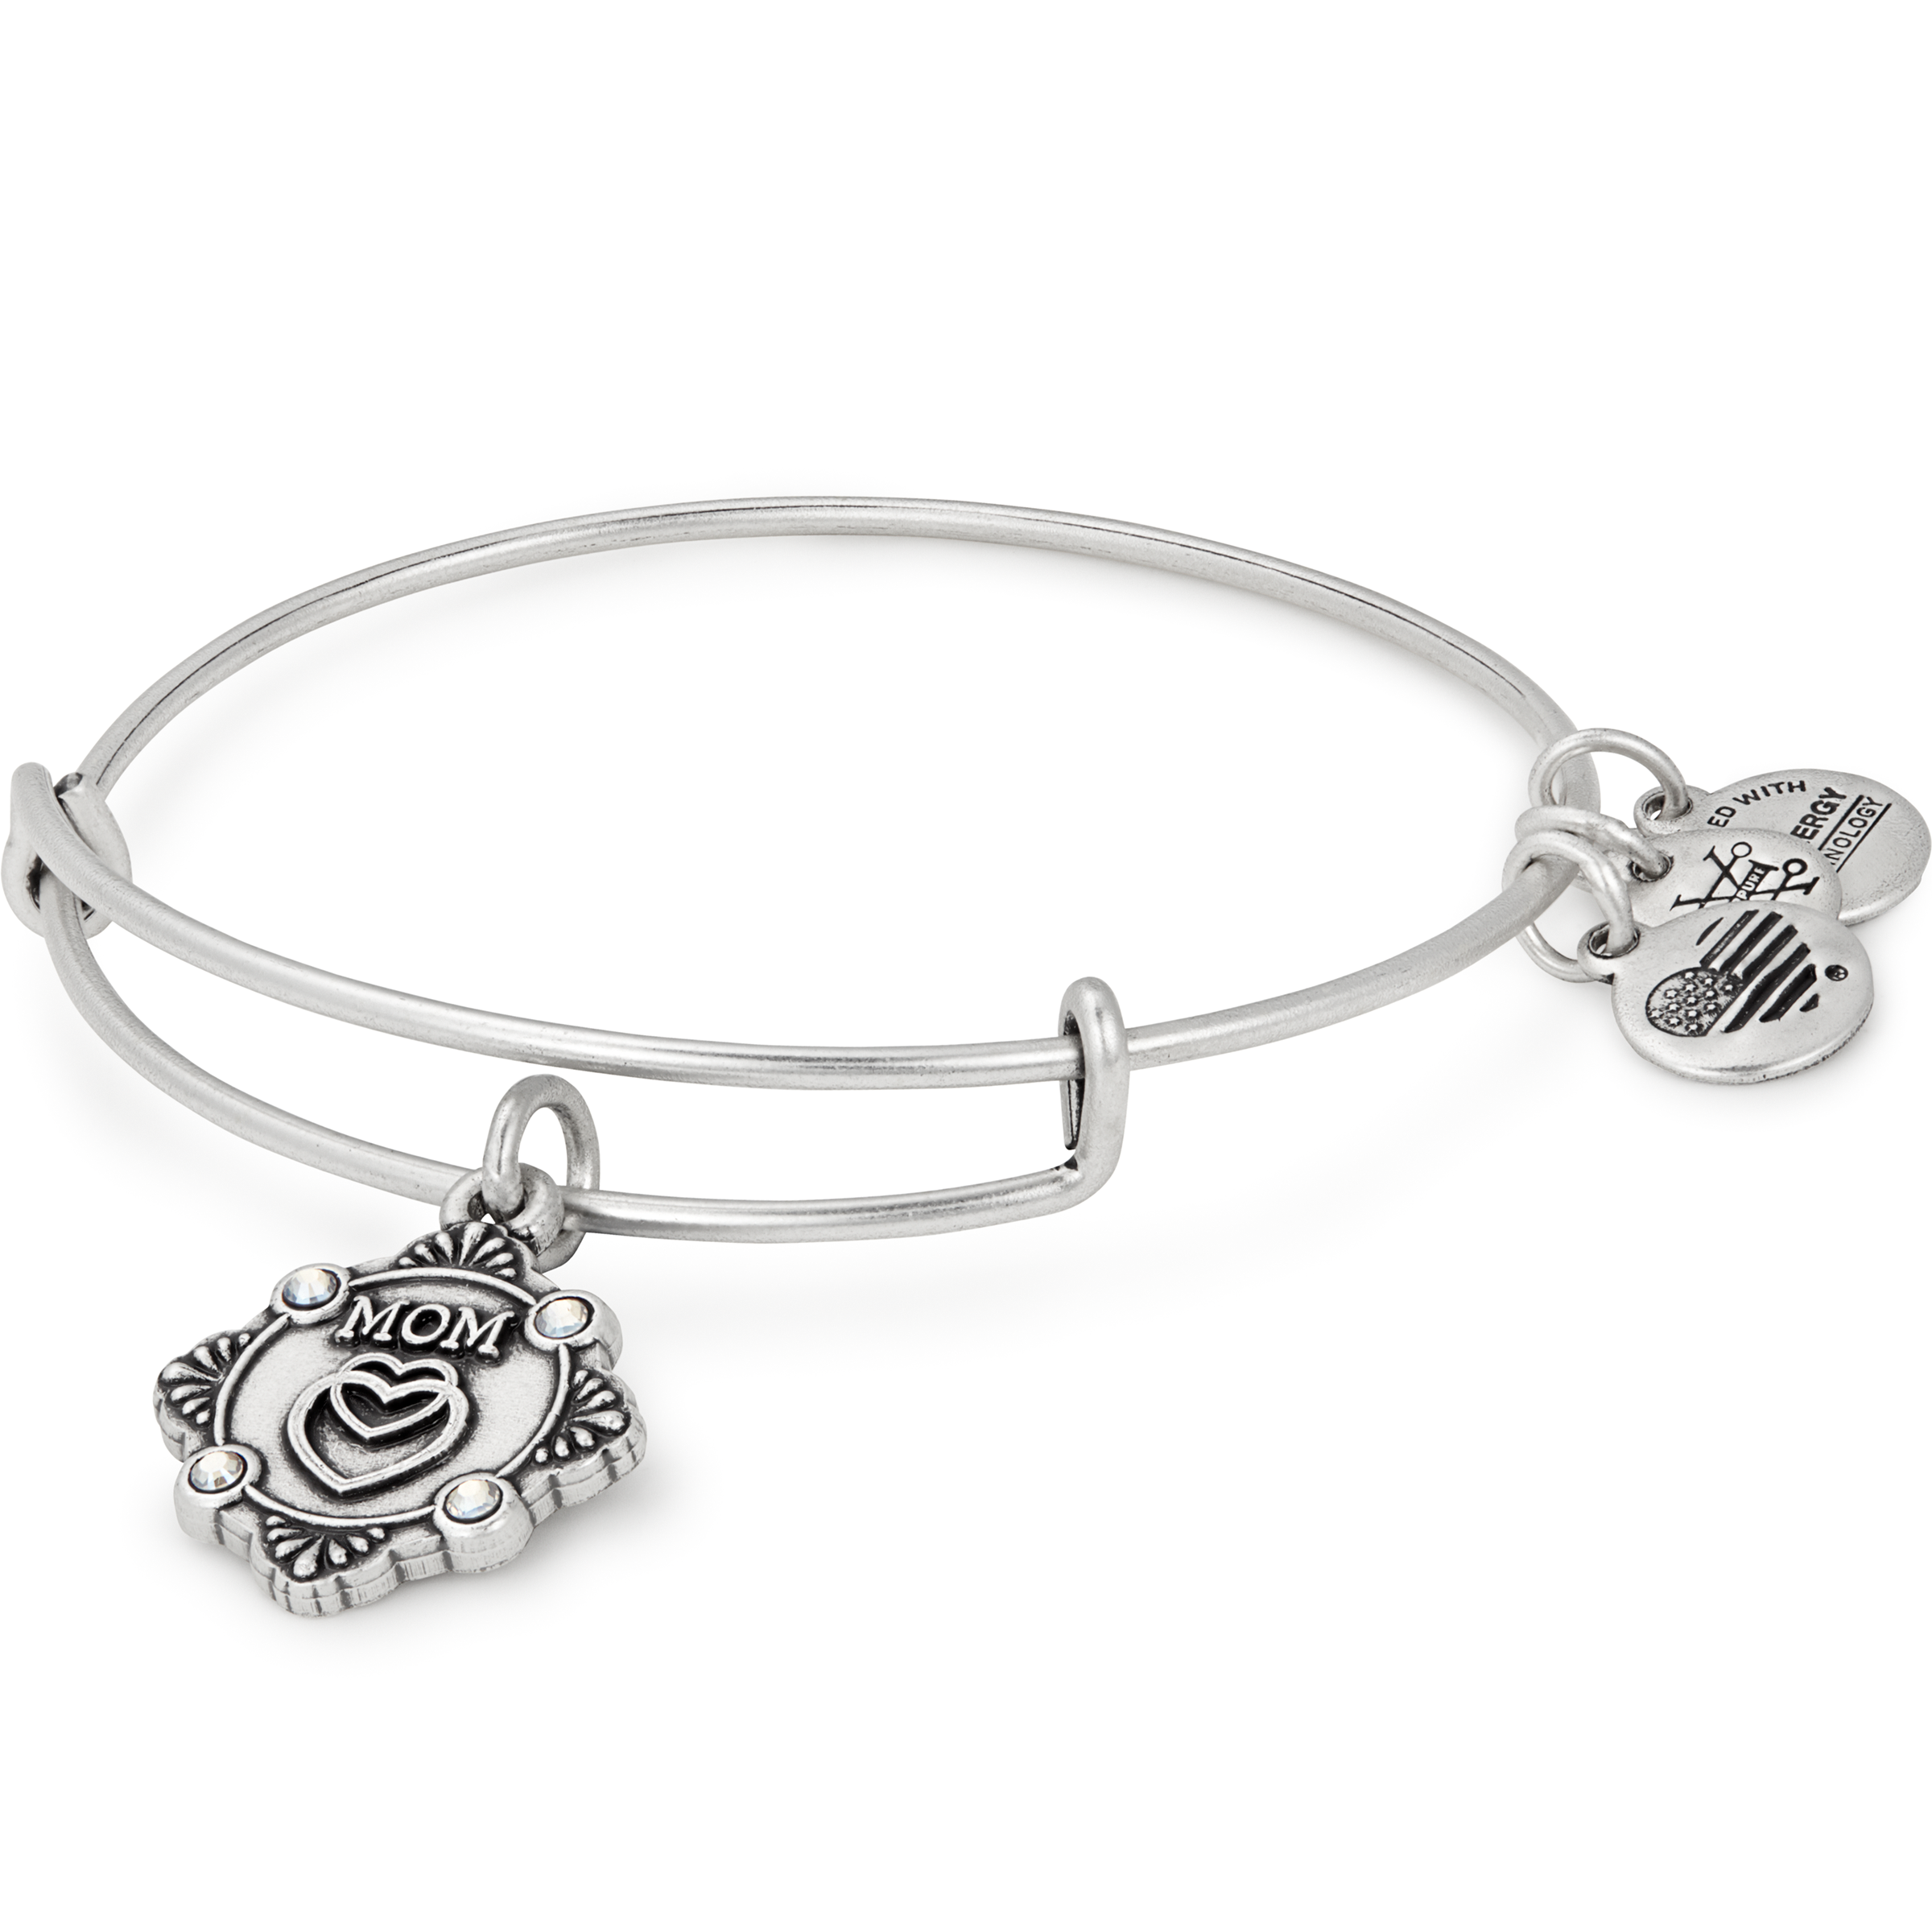 Buy Alex and Ani Bless Your Heart Bracelet at Ubuy India